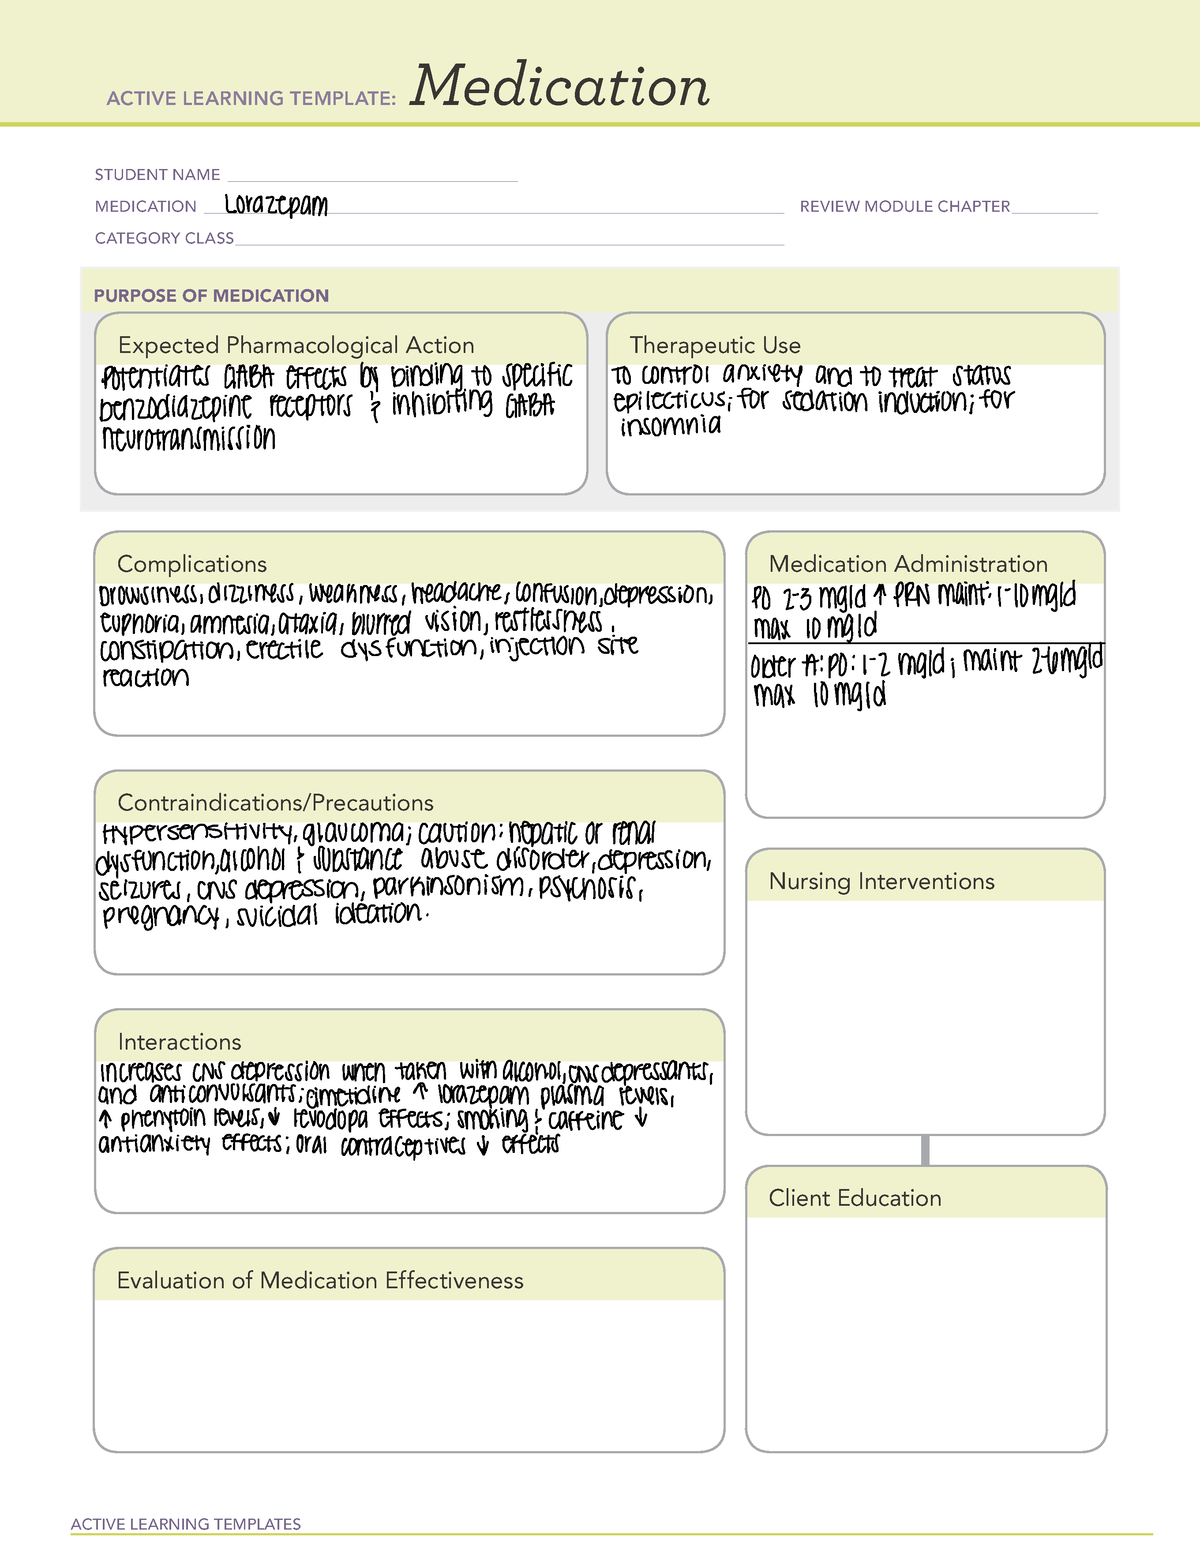 Active Learning Template Lorazepam ACTIVE LEARNING TEMPLATES